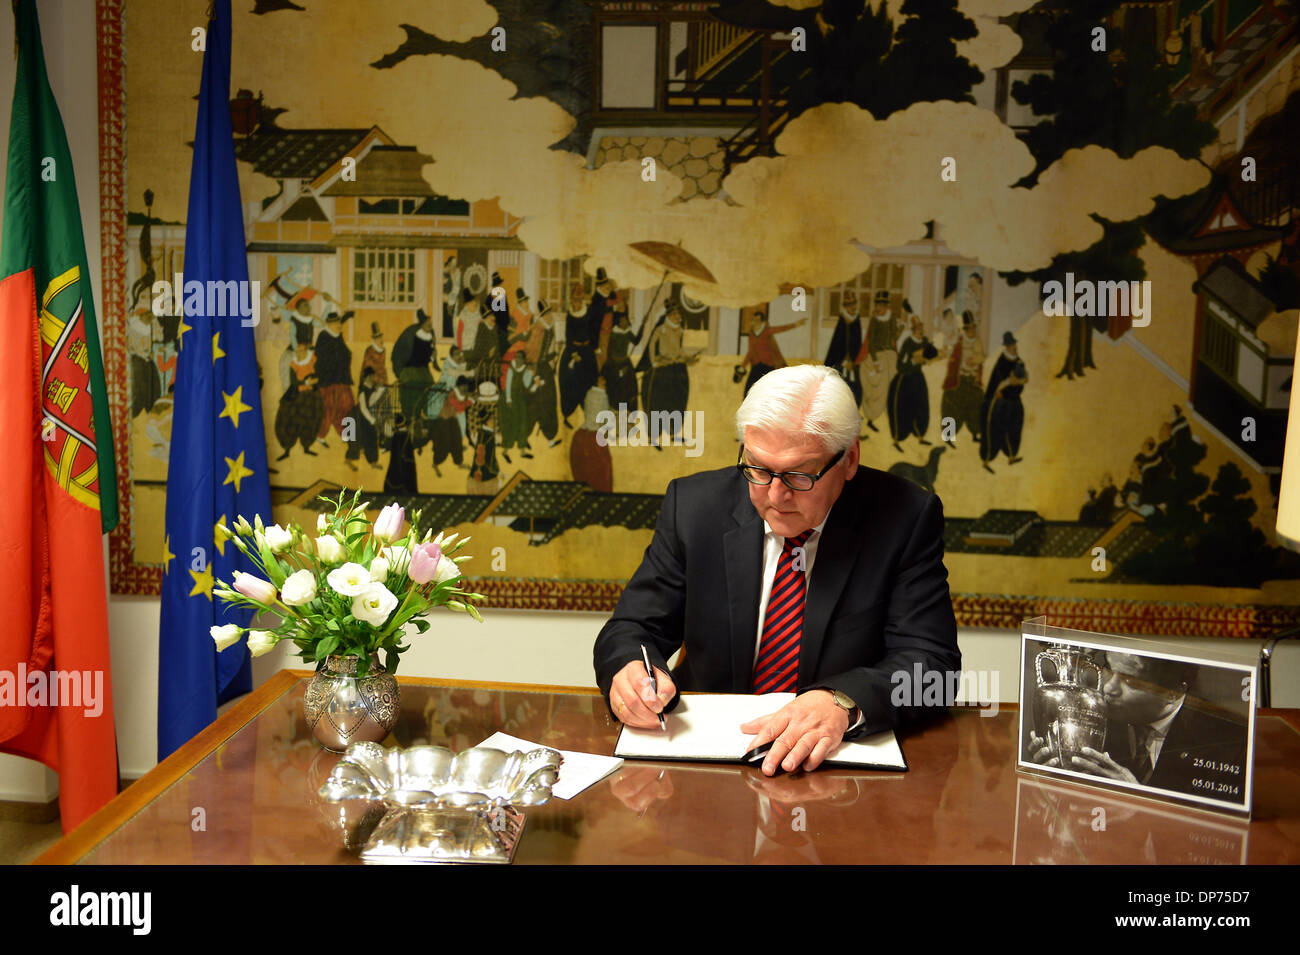 Berlin, Germany. January 8th 2014. Federal Minister for Foreign Affairs Frank-Walter Steinmeier (SPD) signs the condolence book in memory of the Portuguese football player Eusébio (aka Black Panther) in the Portuguese Embassy in Berlin. Goncalo Silva/Alamy Live News. Stock Photo